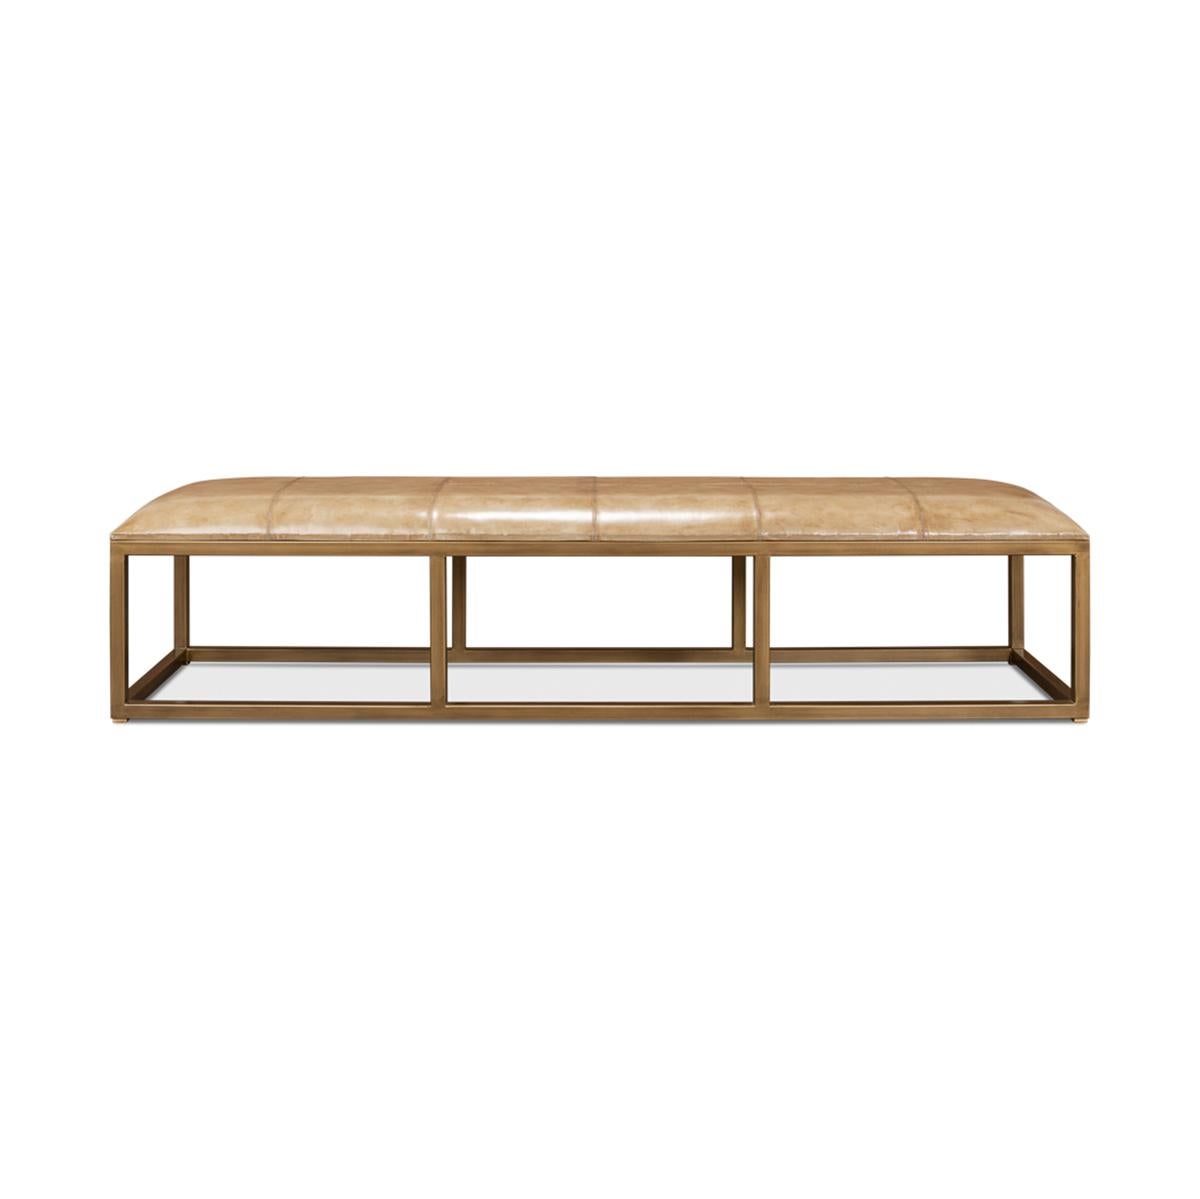 Modern long hall bench with a beige antiqued leather stitched cushion on an antiqued brass-finished iron cube form base.

Dimensions: 75